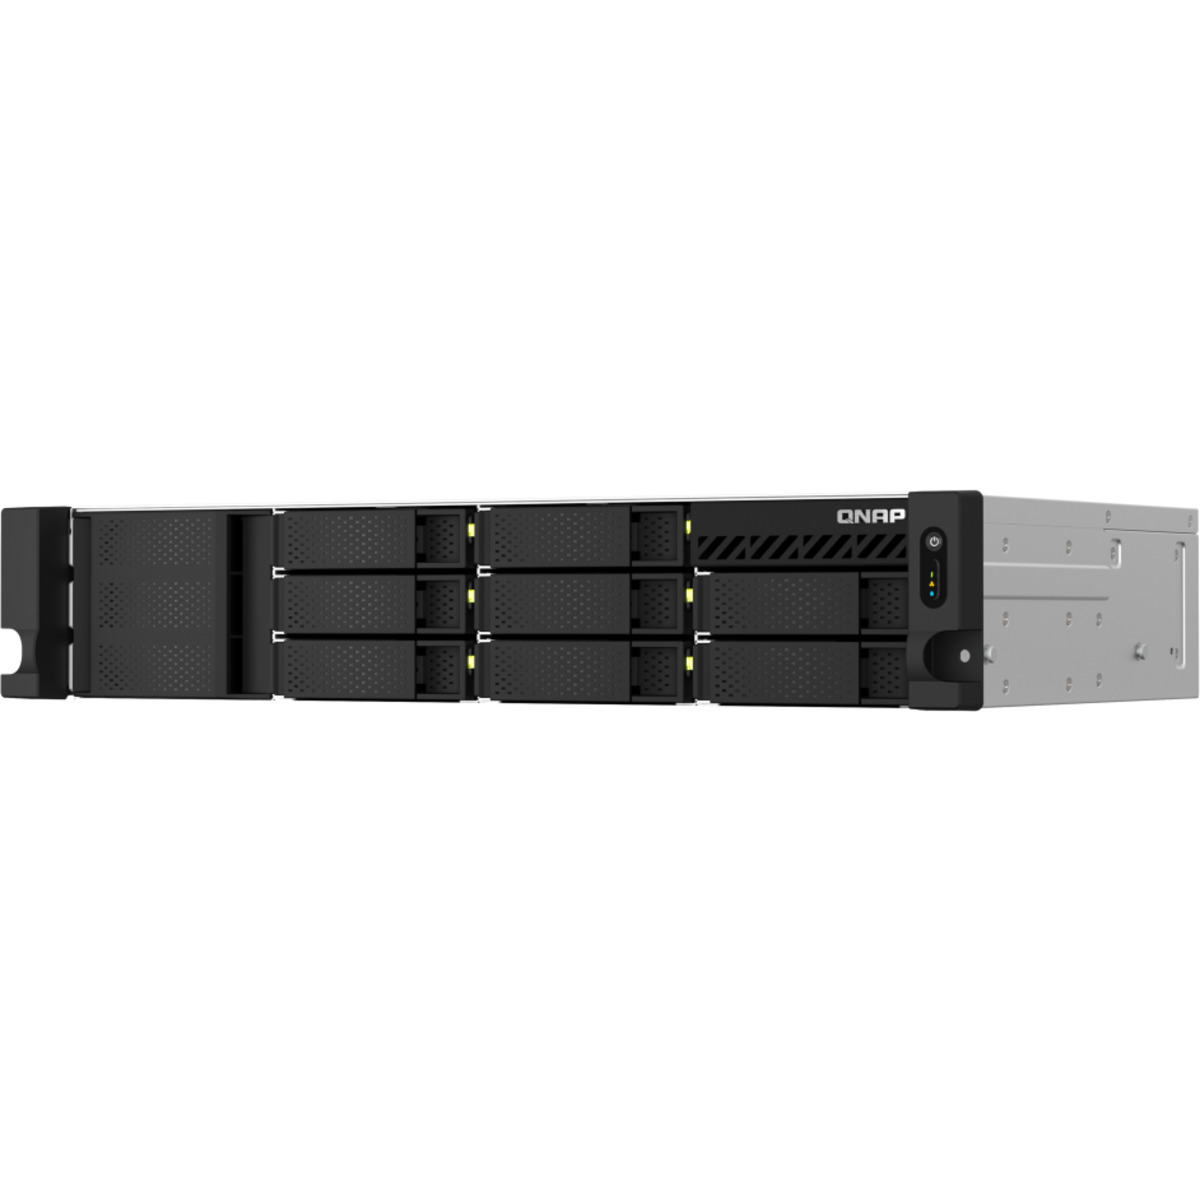 QNAP TS-864eU-RP 48tb 8-Bay RackMount Multimedia / Power User / Business NAS - Network Attached Storage Device 6x8tb Samsung 870 QVO MZ-77Q8T0 2.5 560/530MB/s SATA 6Gb/s SSD CONSUMER Class Drives Installed - Burn-In Tested TS-864eU-RP